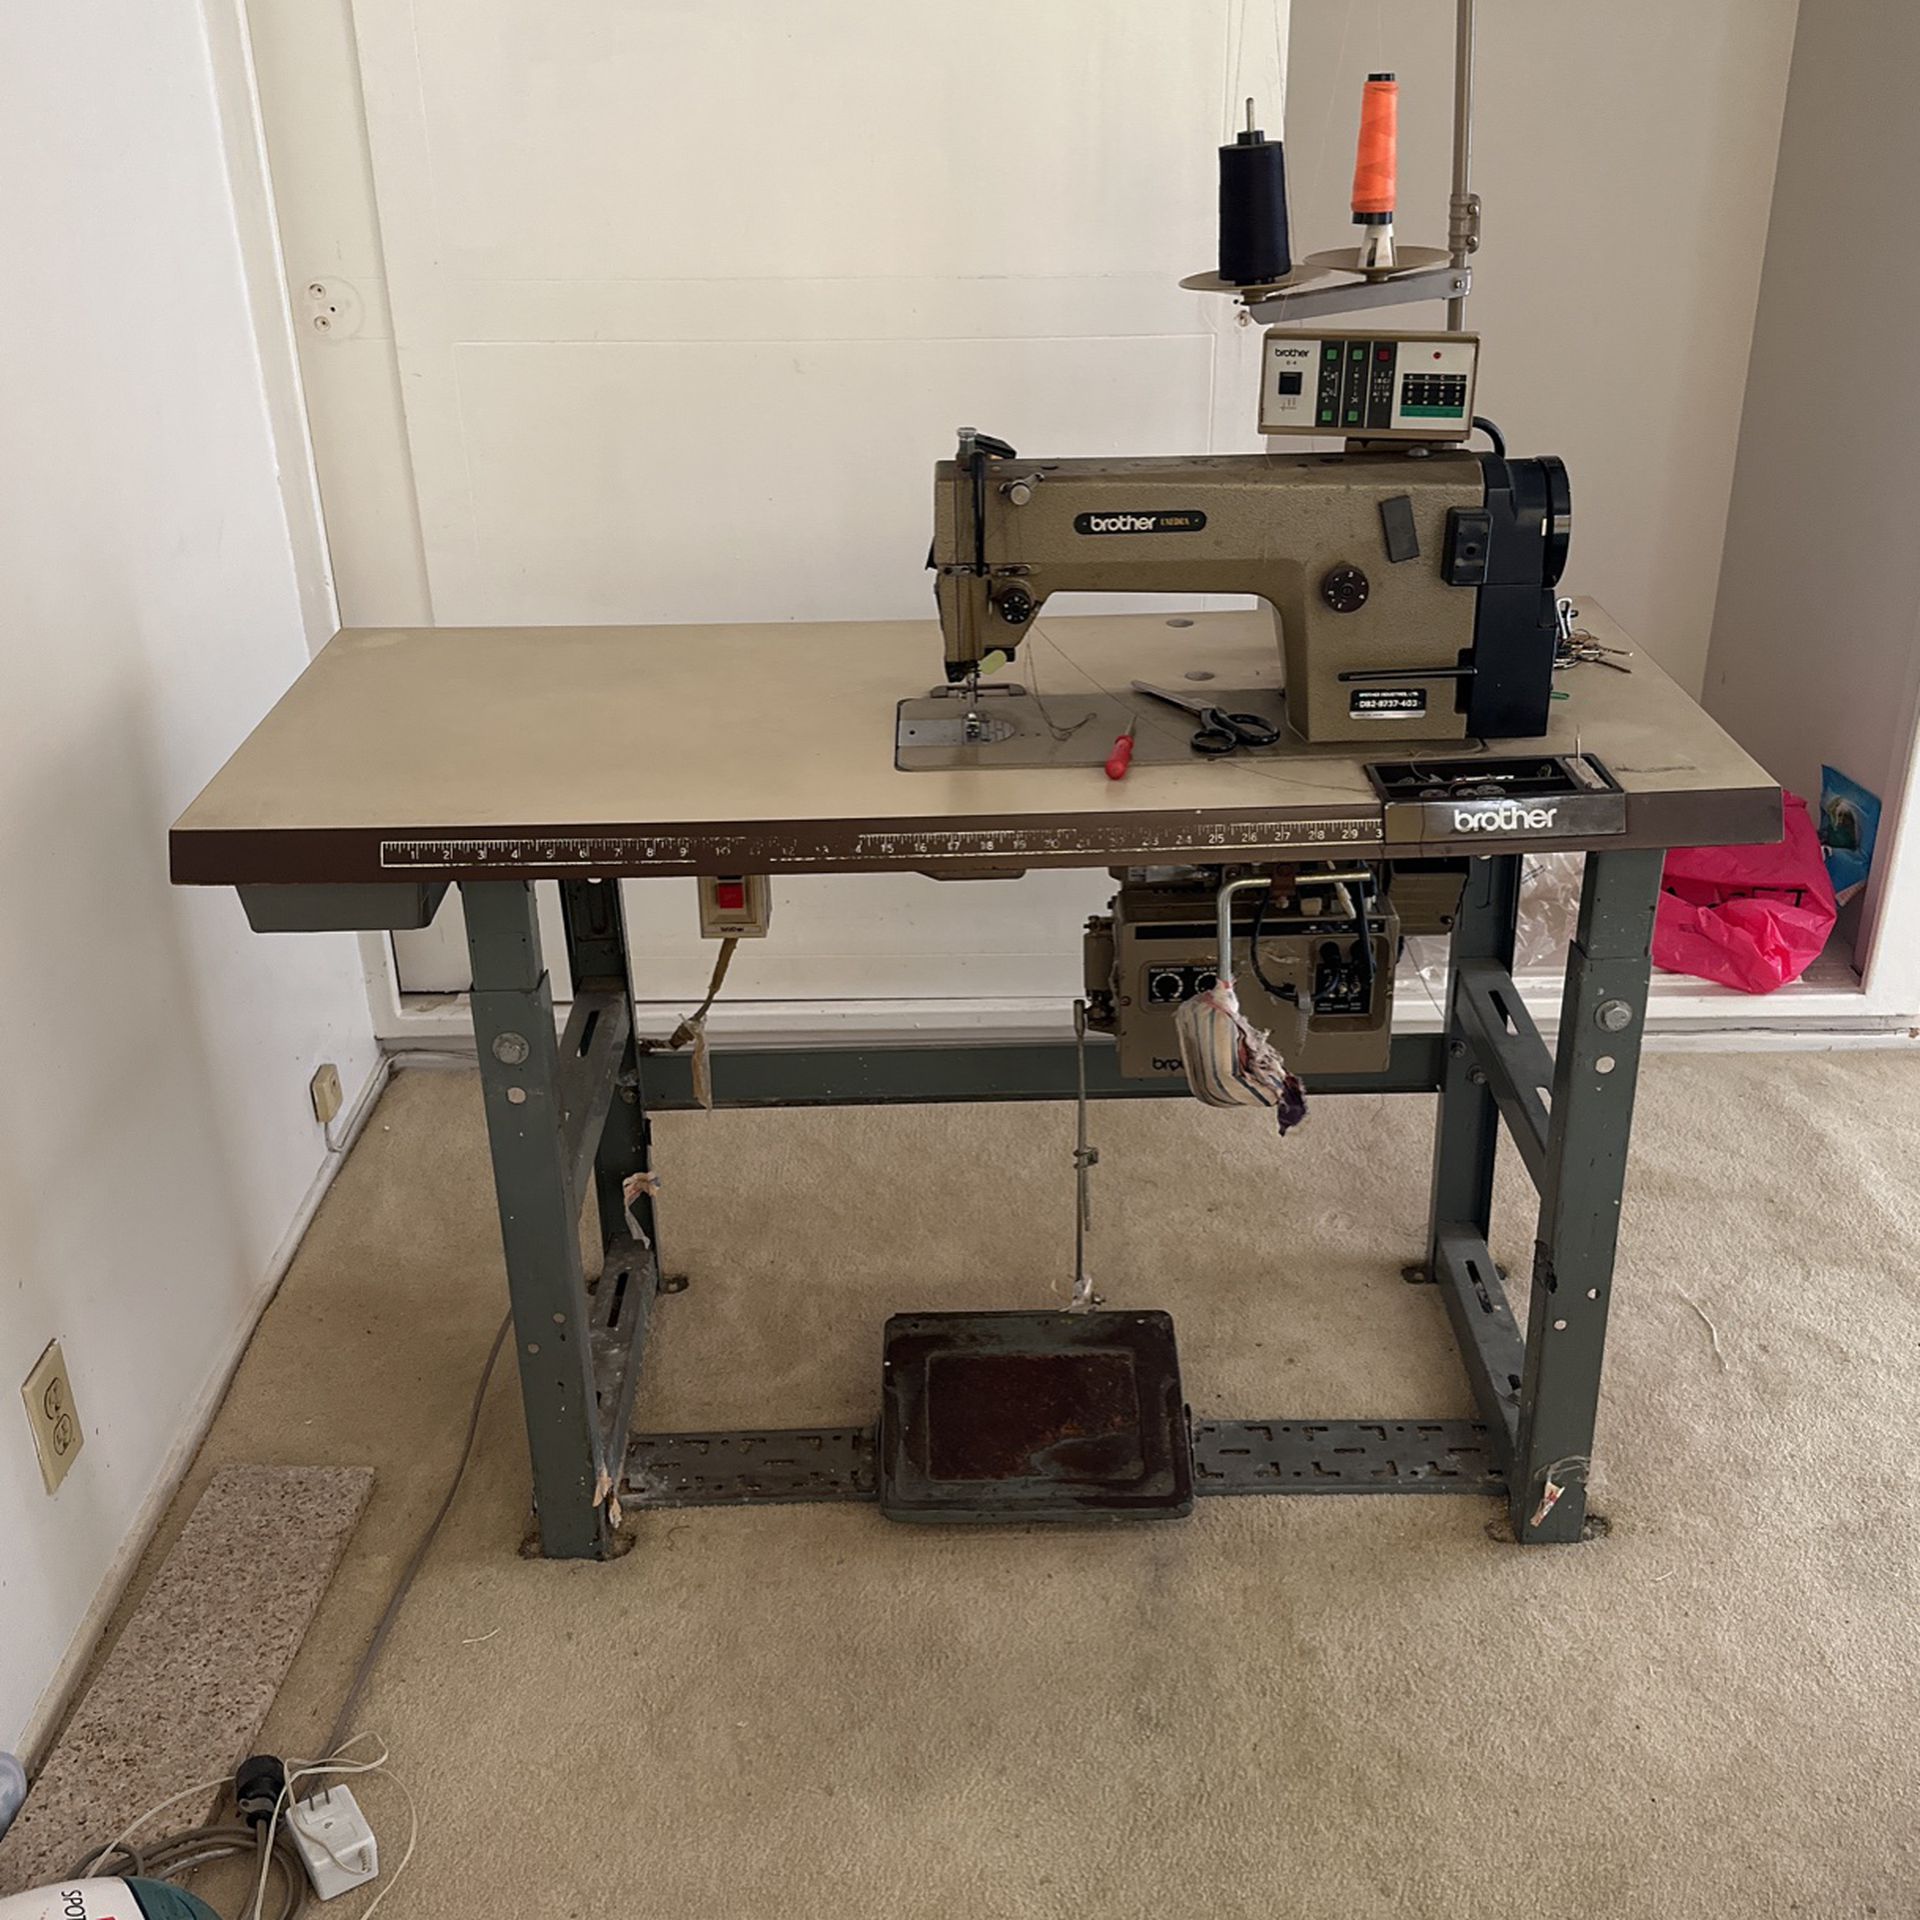 Brother PE800 Embroidery Machine for Sale in Los Angeles, CA - OfferUp